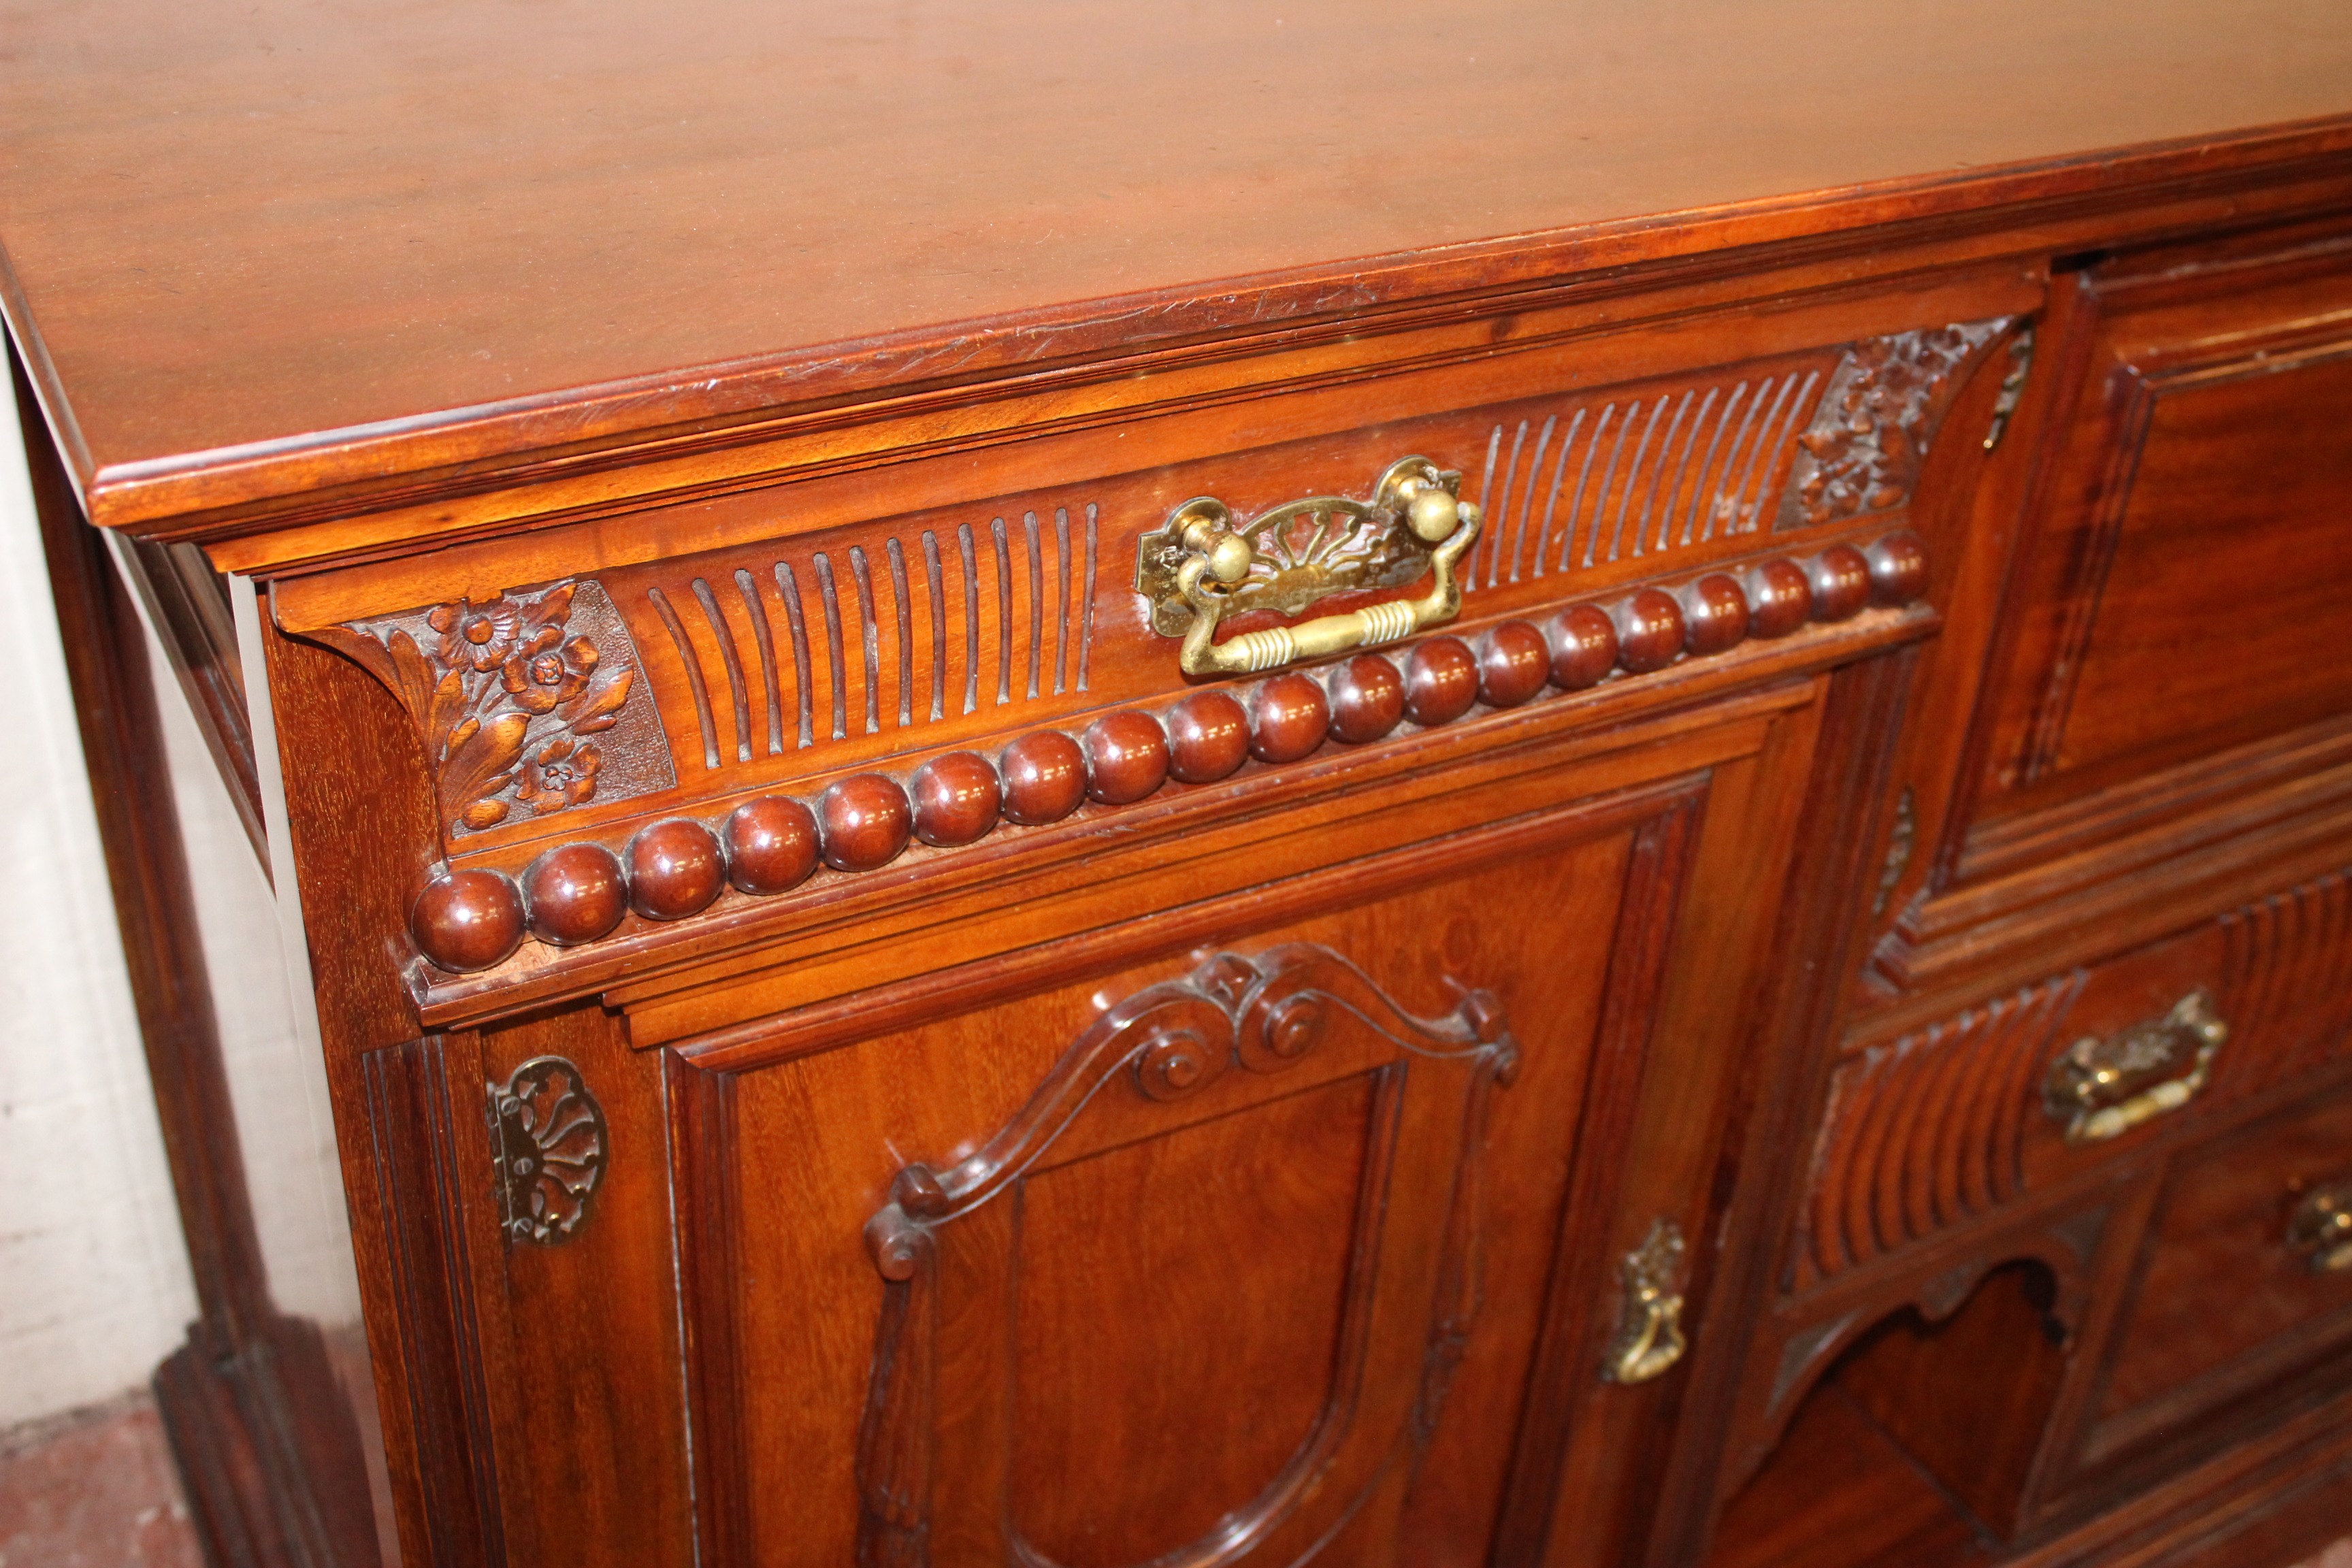 A late Edwardian mahogany mirror back sideboard of large proportions with drawers and cupboards - Image 3 of 4